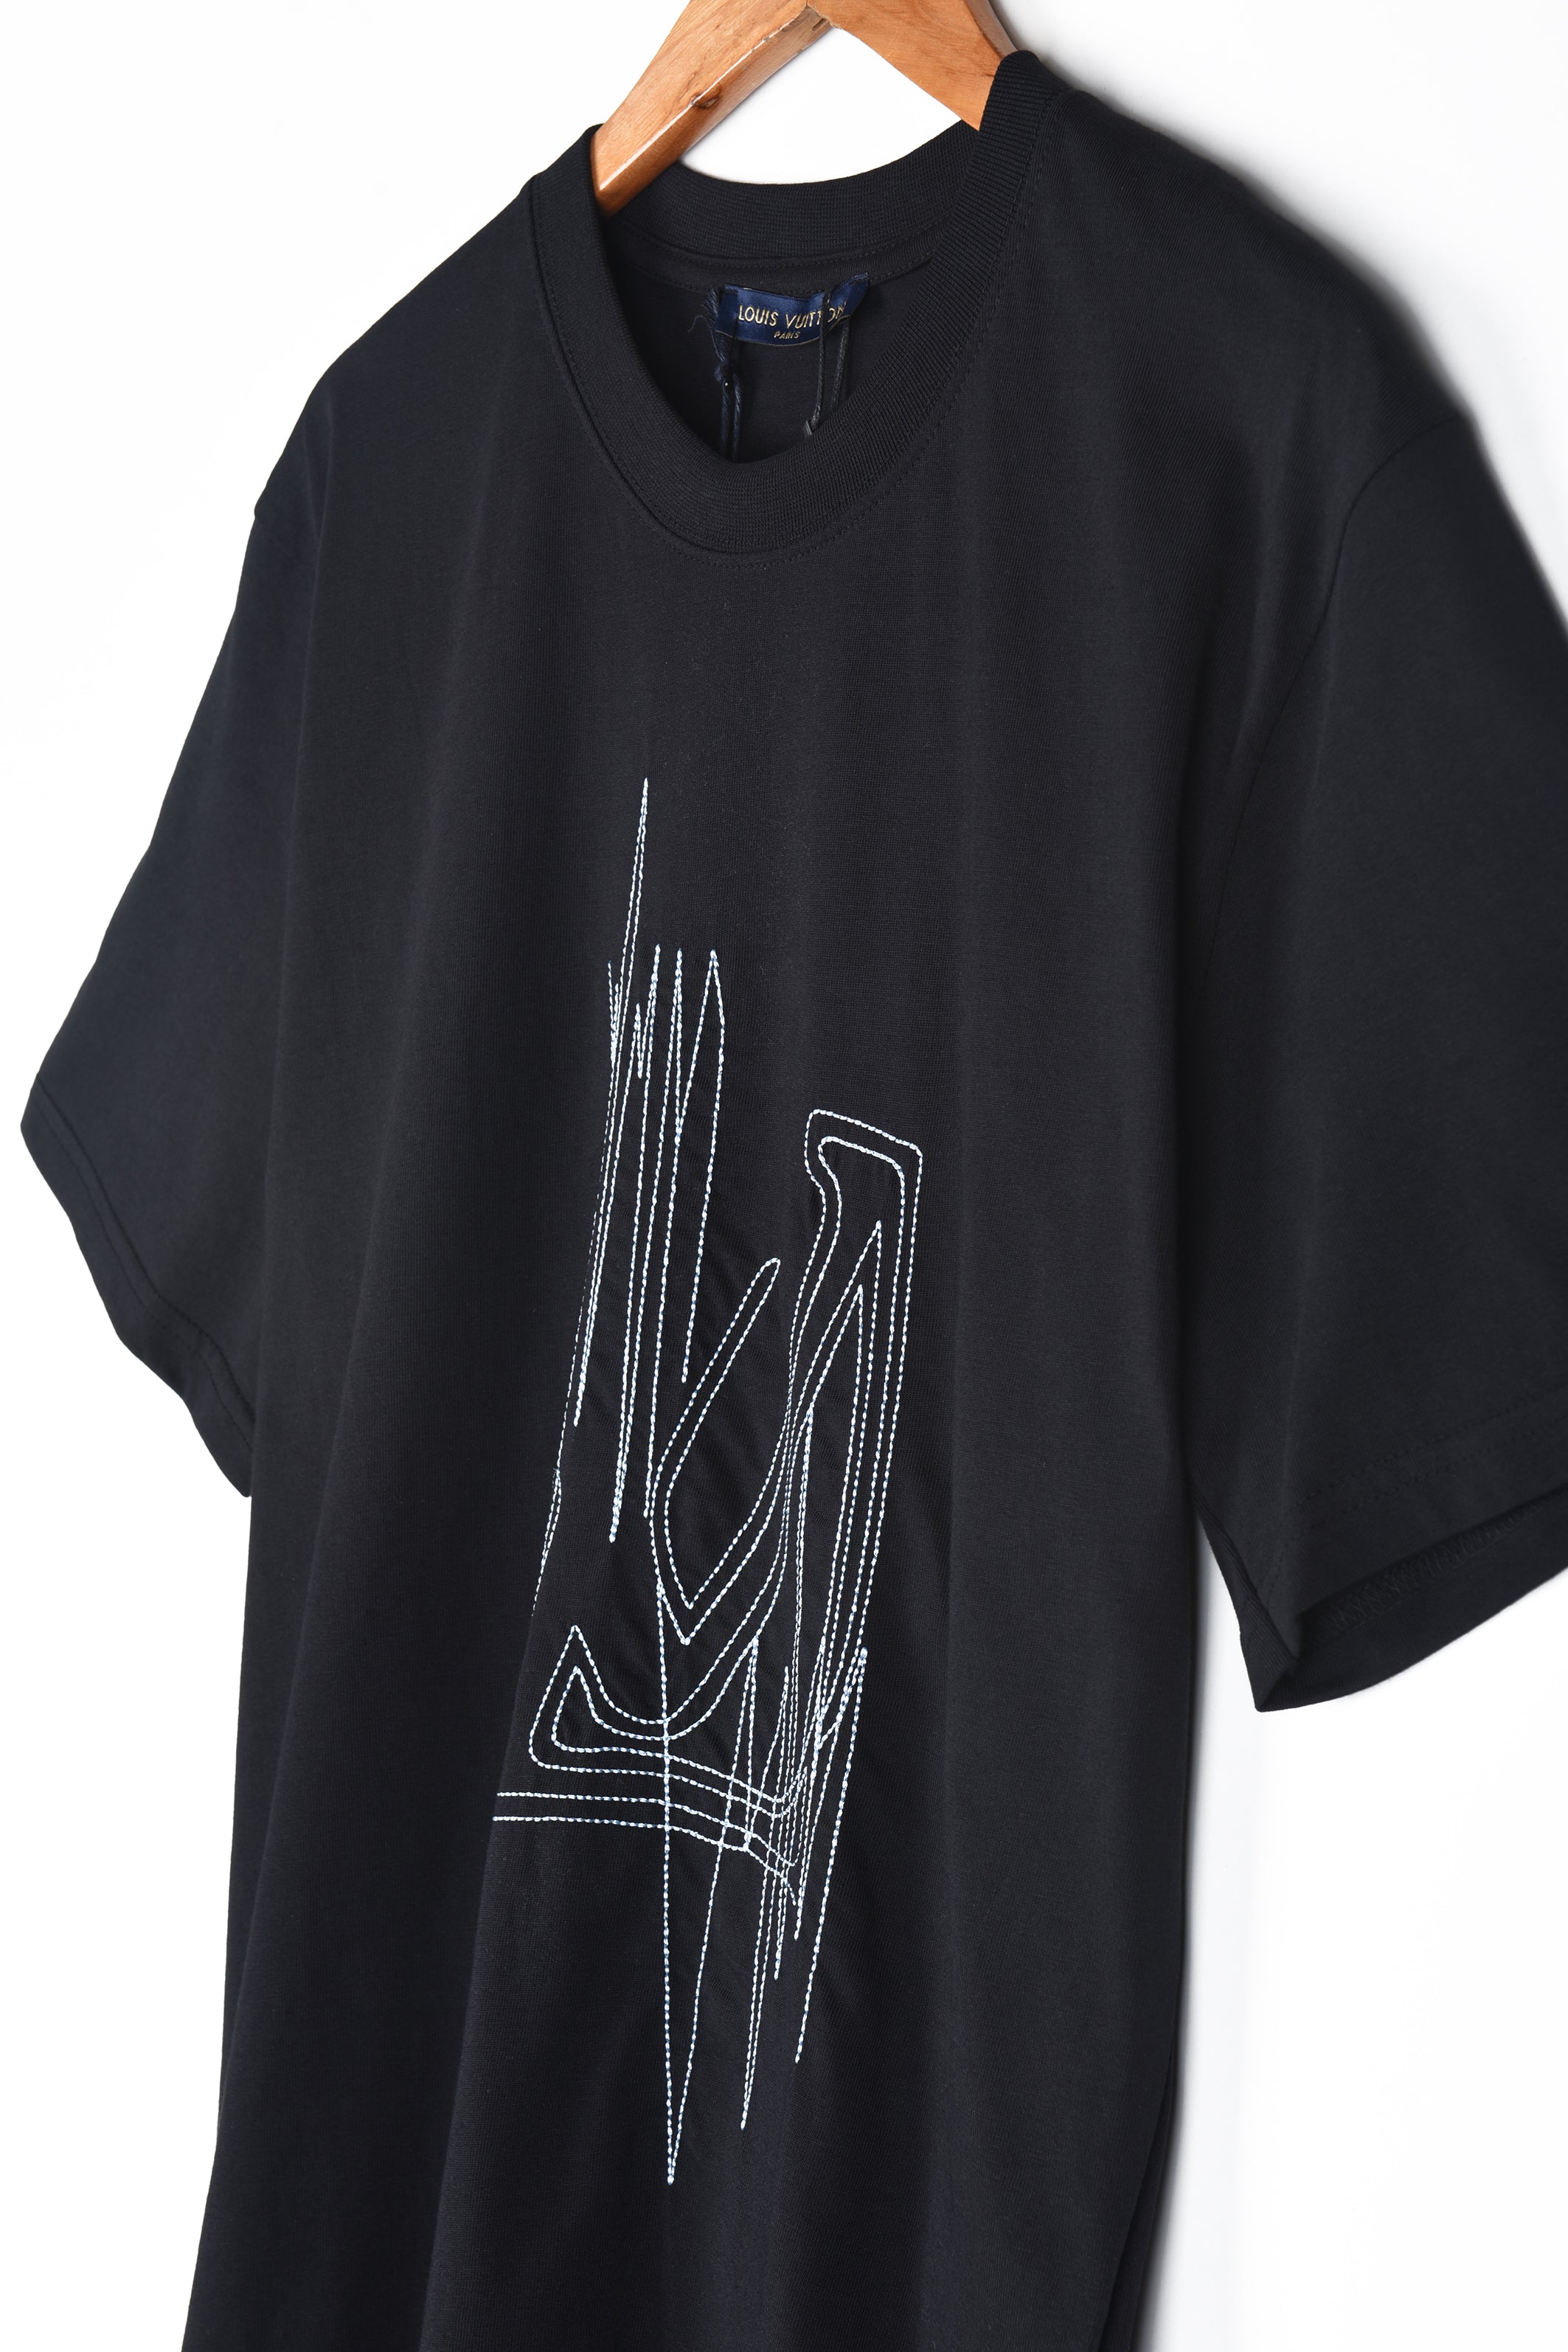 Louis Vuitton Frequency Graphic Tee Shirt black L